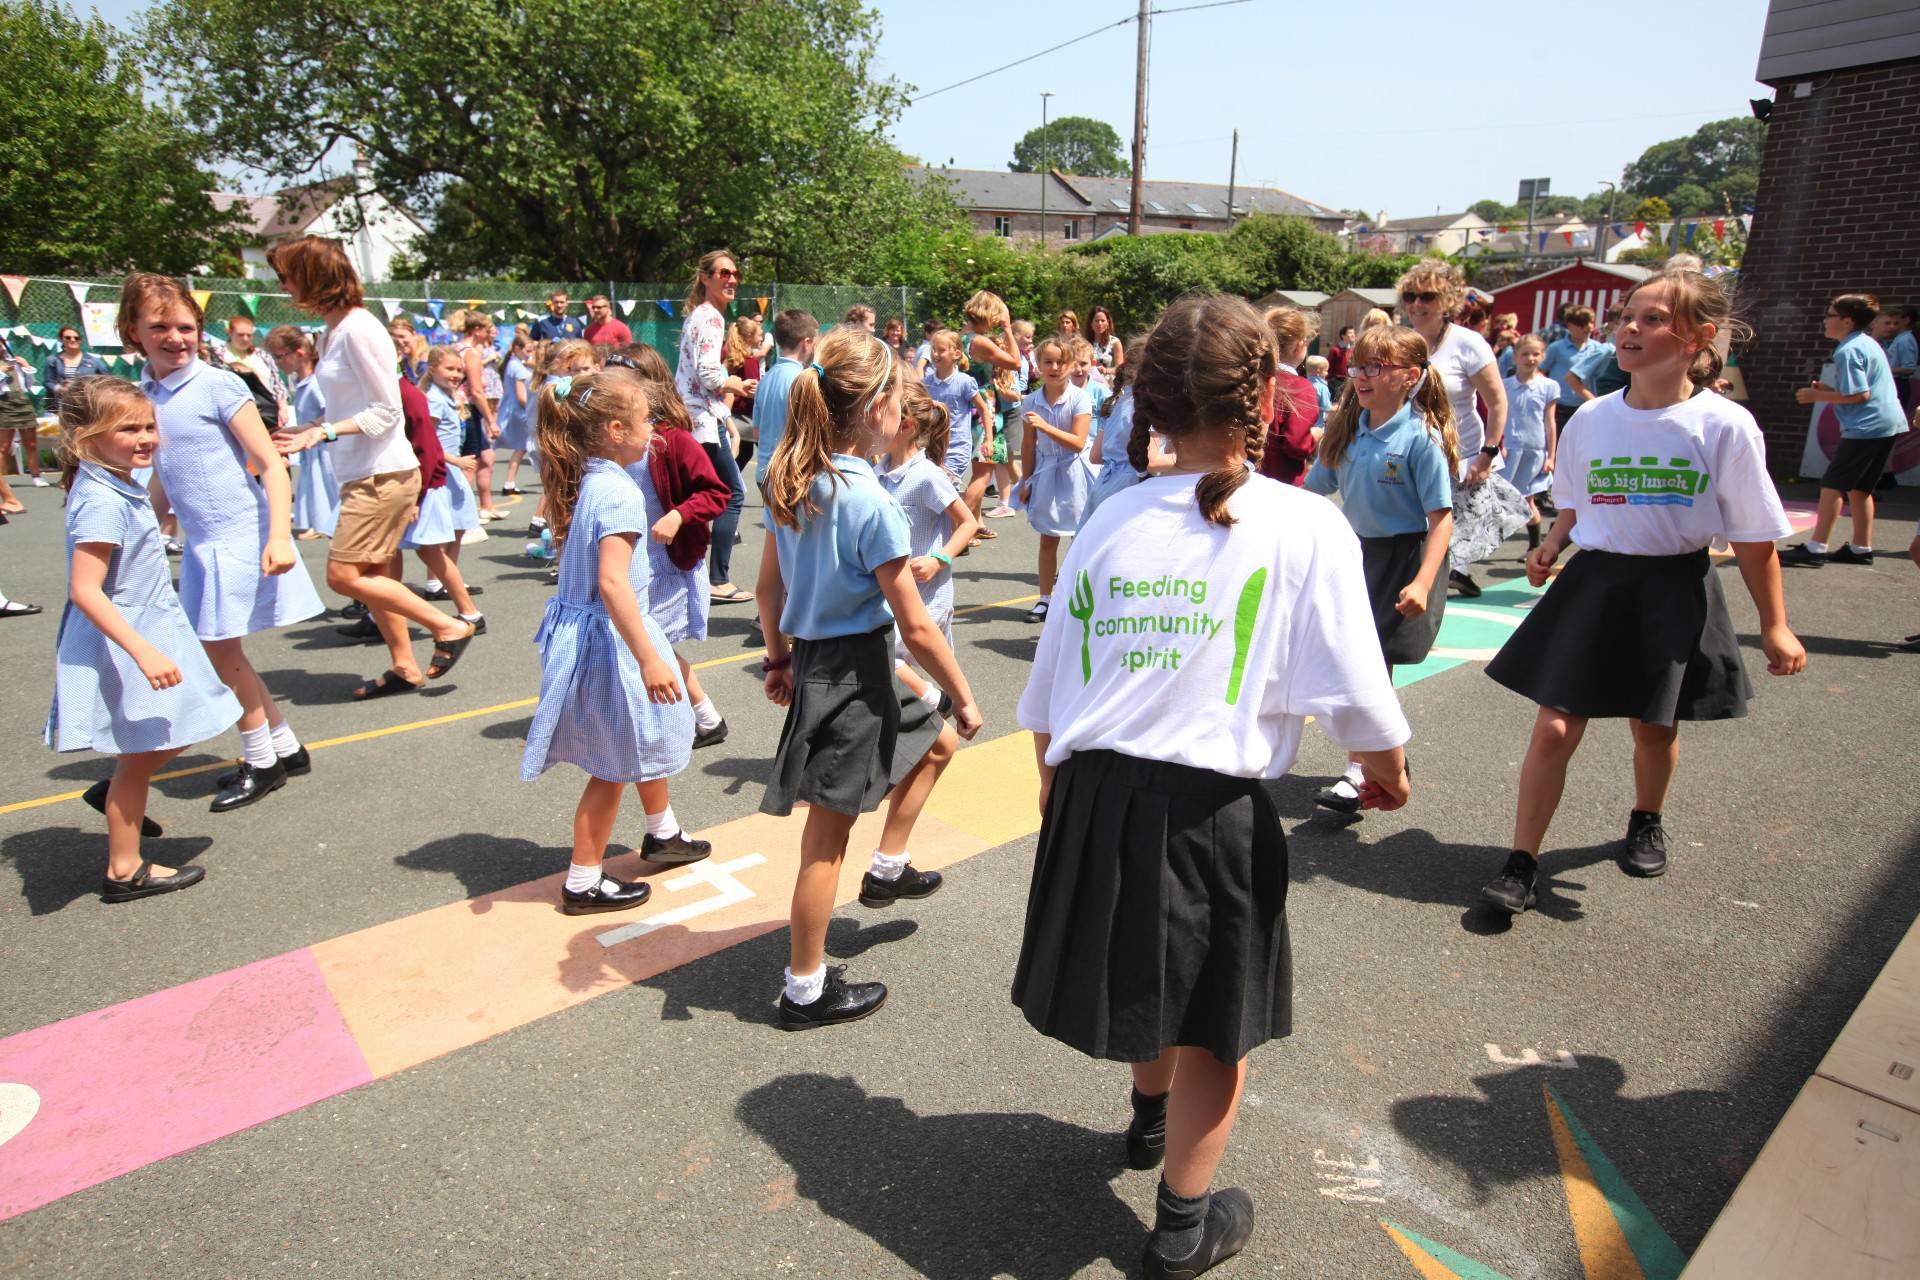 Schoolchildren dancing in a playground. One is wearing a tshirt that says 'The Big Lunch' and one says 'Community spirit'